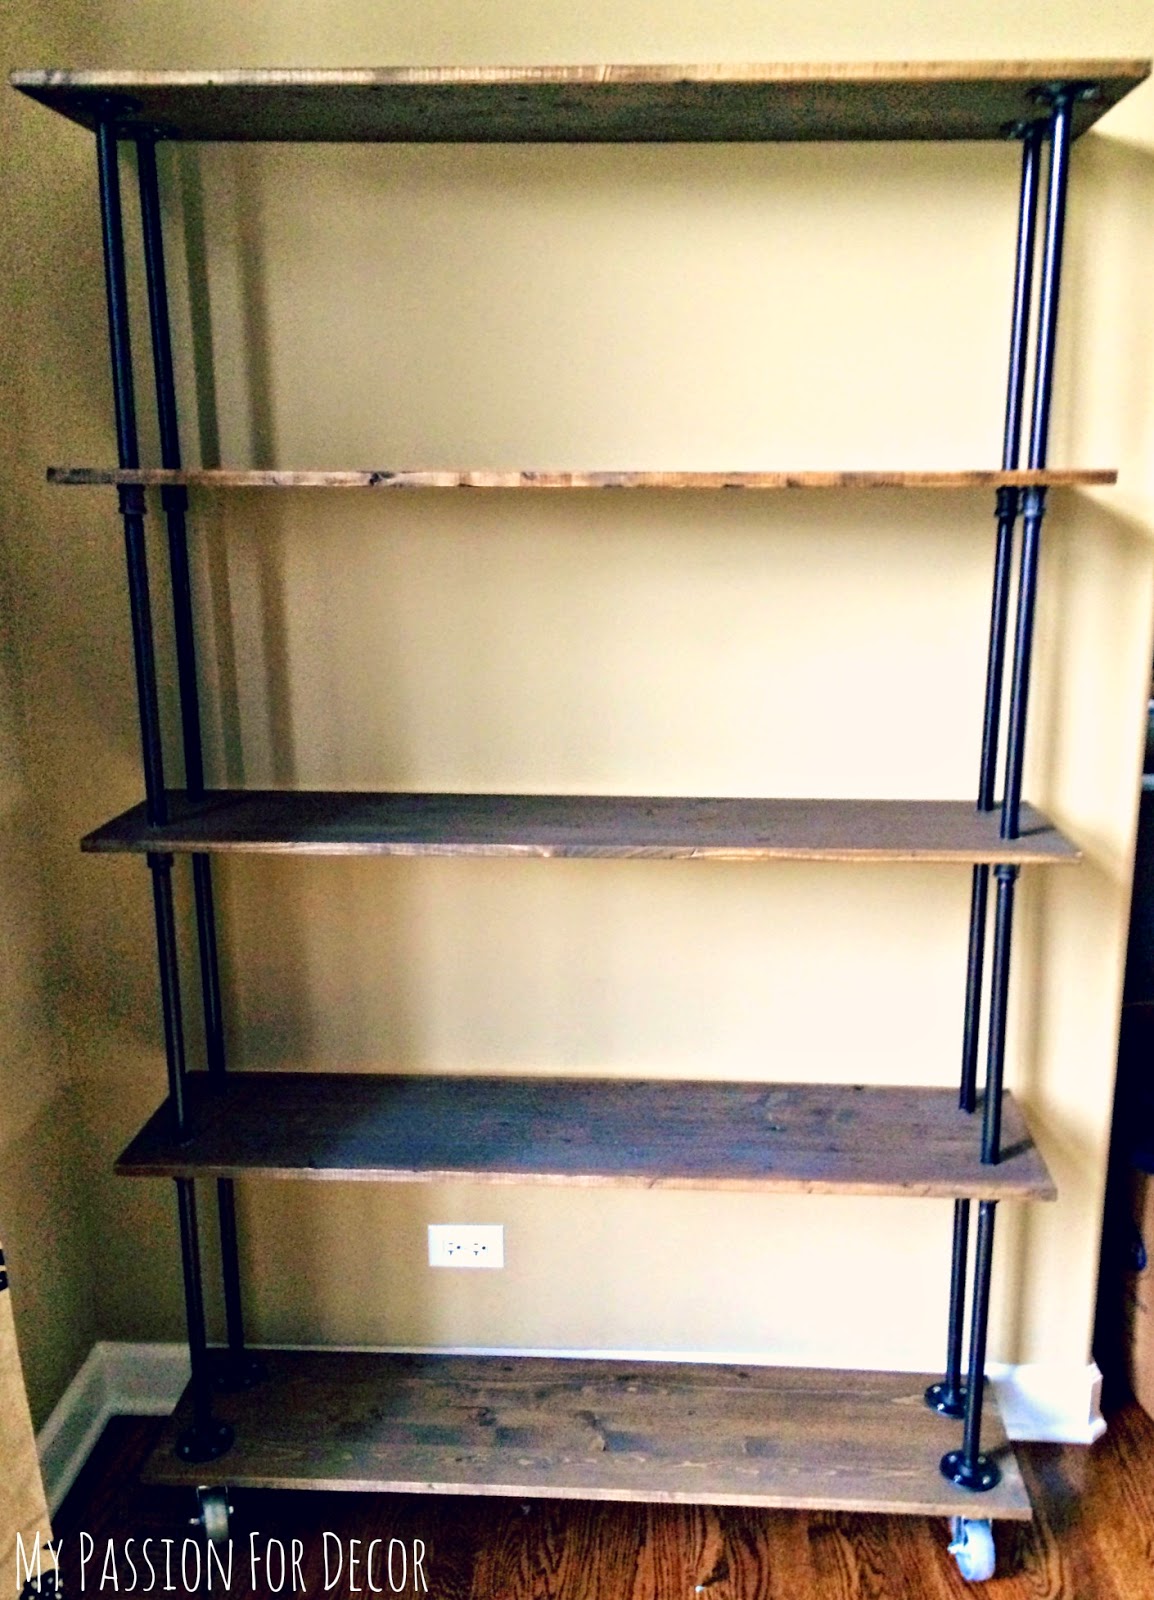 And here's the finished shelving doing what I needed it to do 